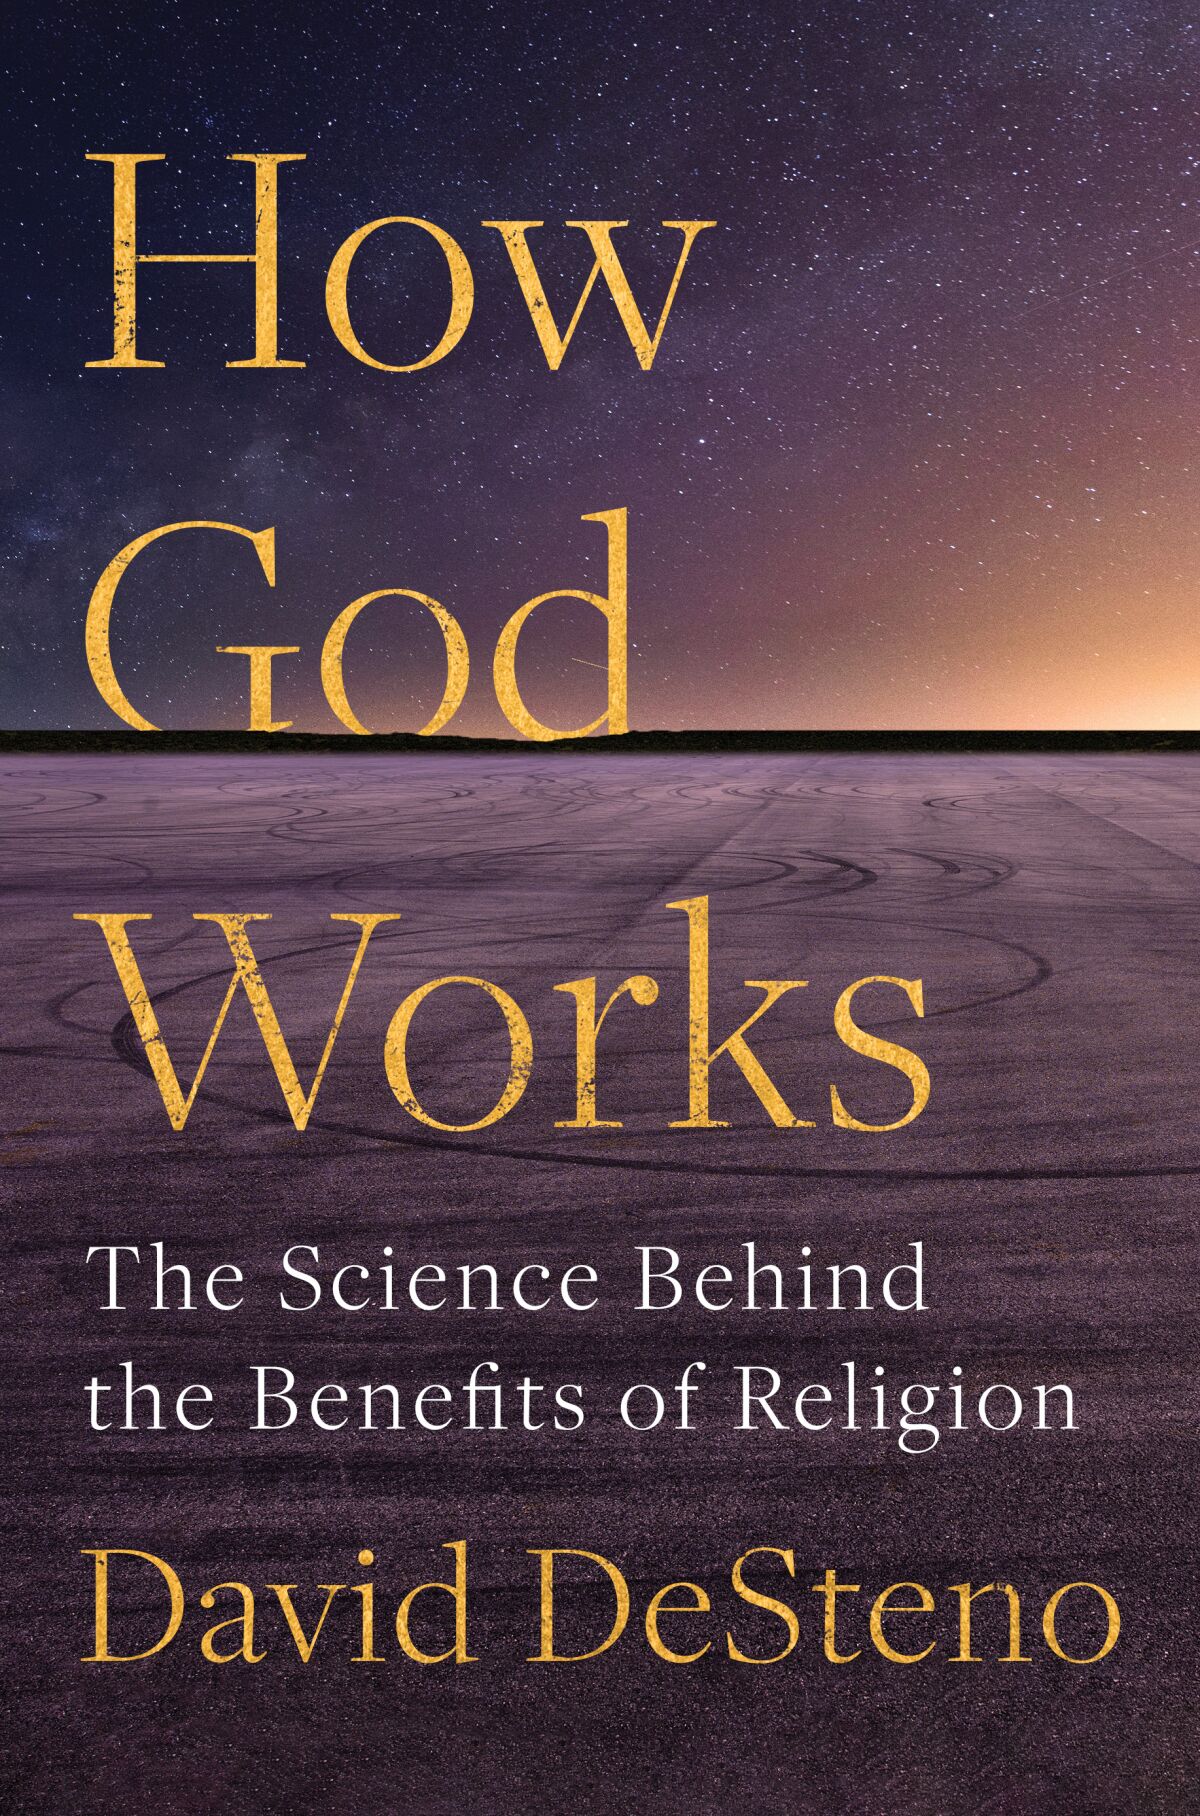 The cover of "How God Works: The Science Behind the Benefits of Religion" by David DeSteno